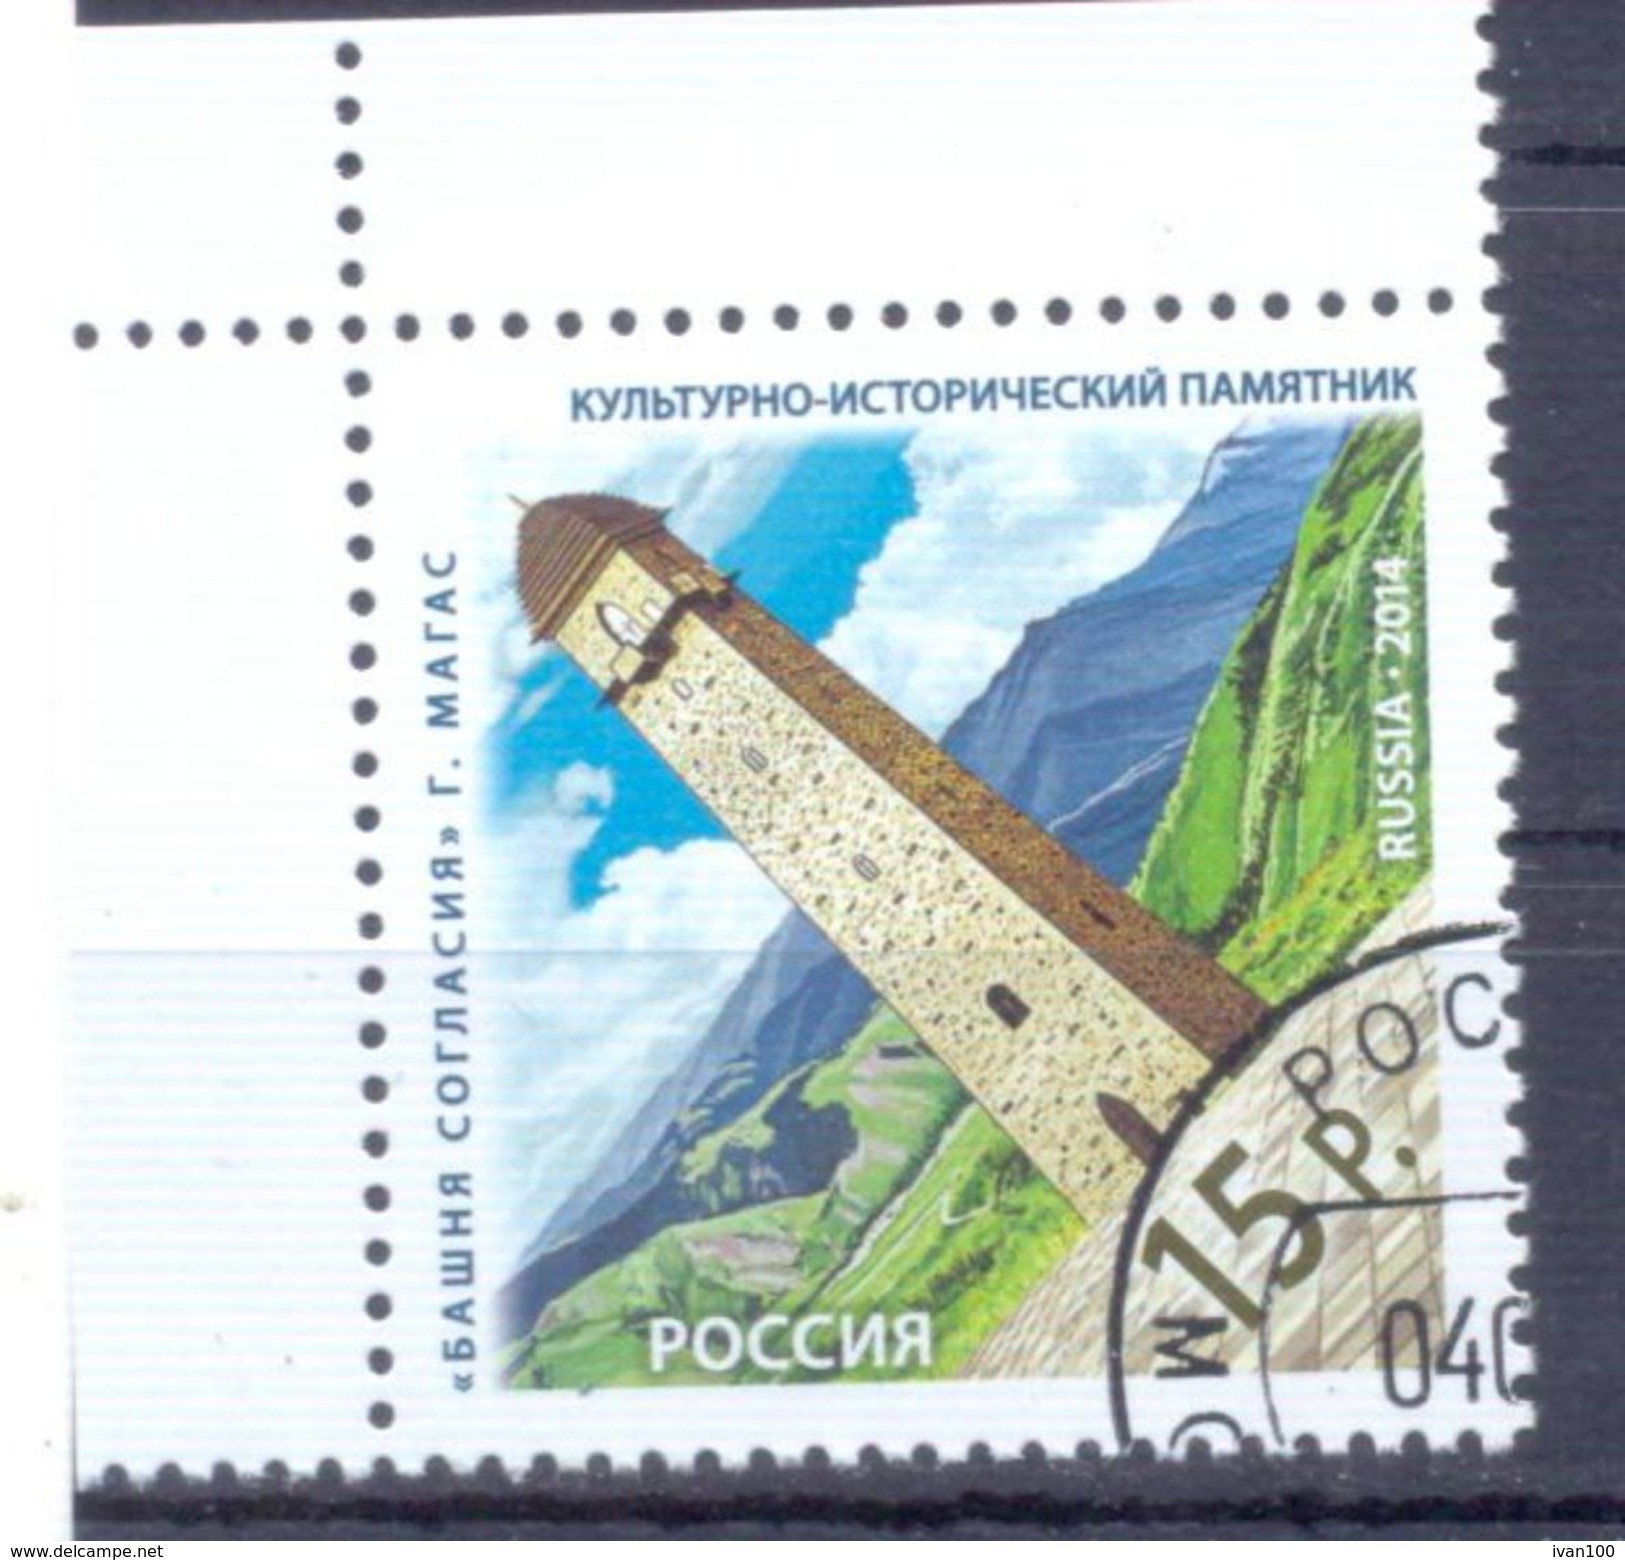 2014. Russia, The Consent Tower, Ingushetia, 1v, Used/CTO - Usados